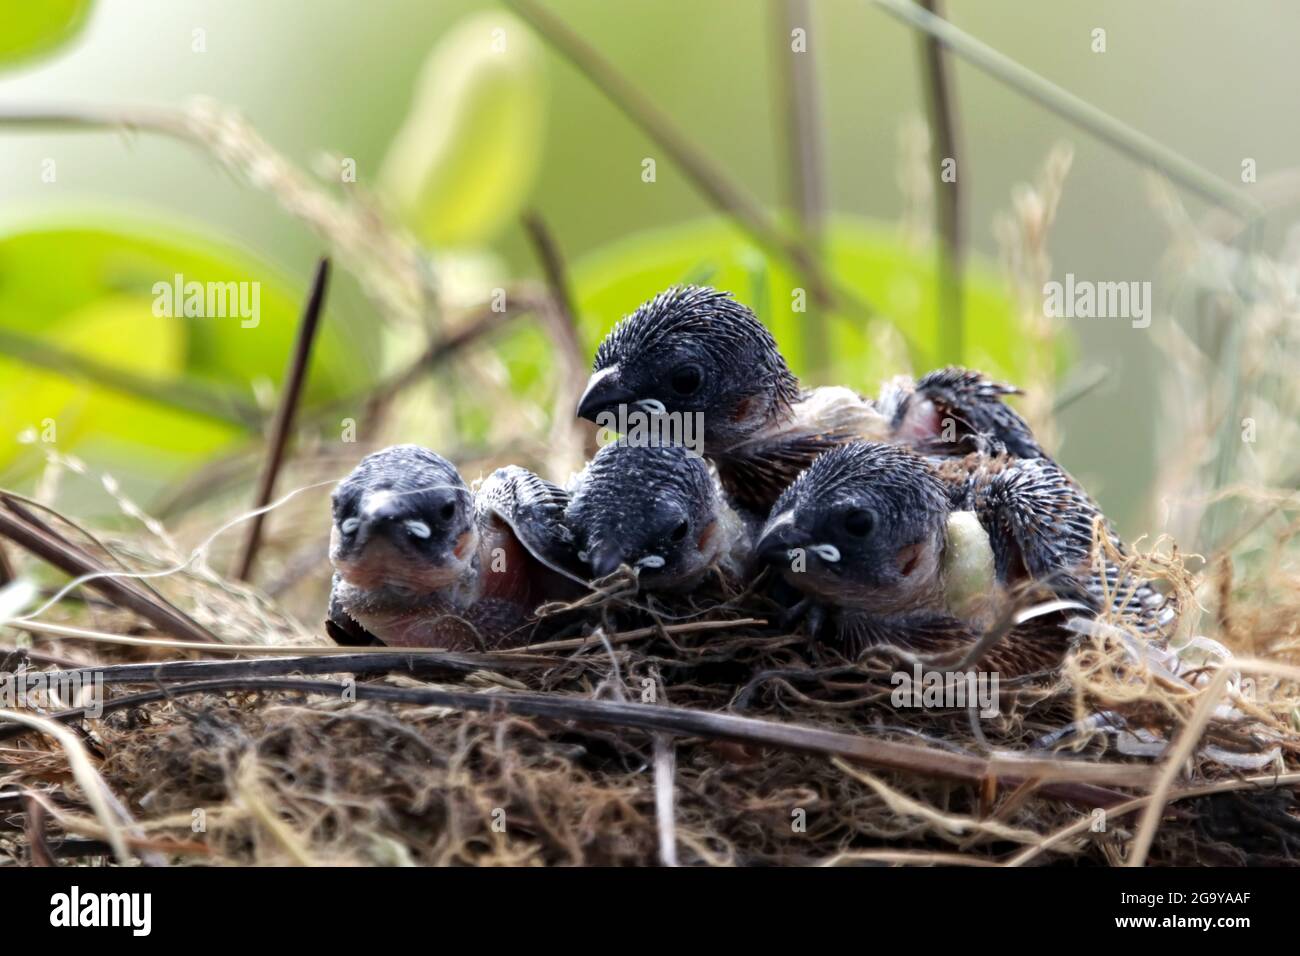 Close-up of swallow chicks in a nest, Indonesia Stock Photo